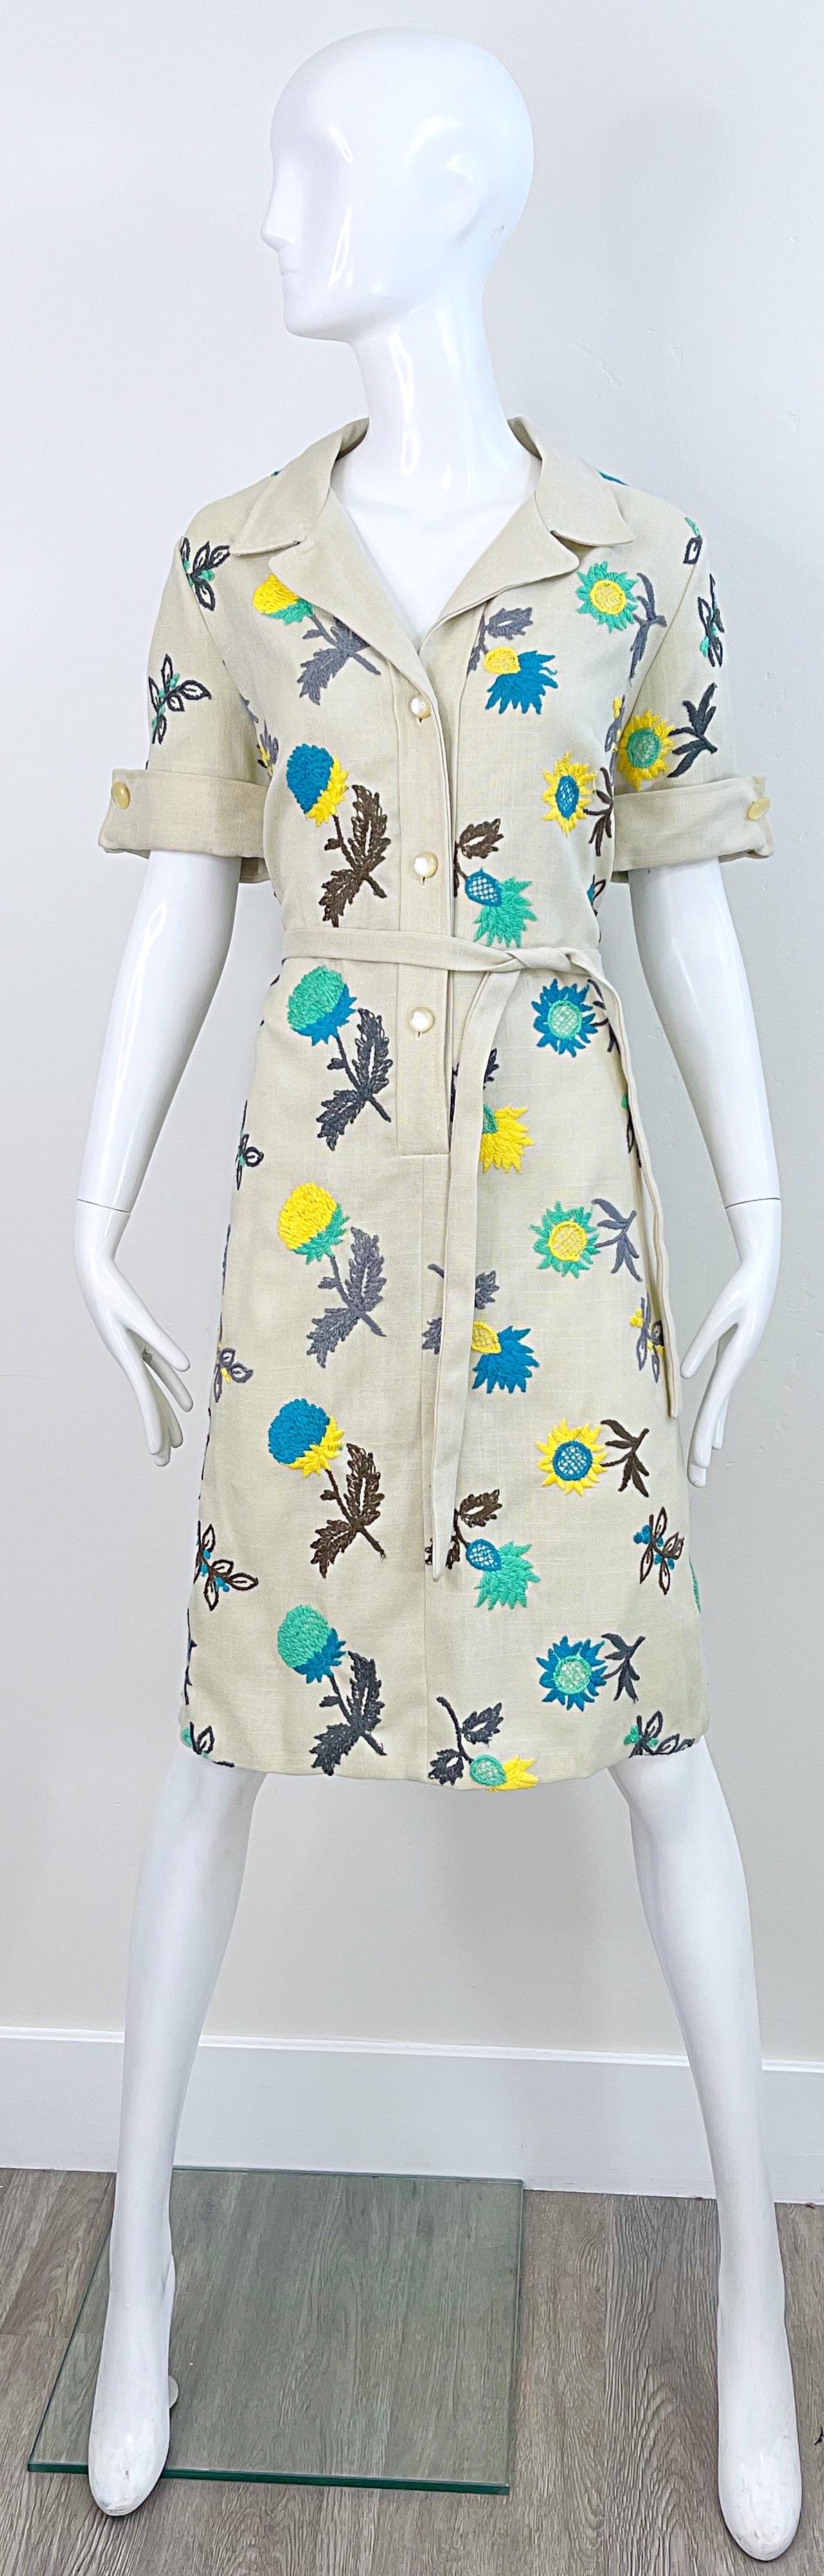 Wonderful early 1970s PETER STEVENS Irish linen khaki embroidered short sleeve shirt dress ! Features embroidered flowers in cobalt blue, turquoise, green, yellow, brown, and grey. Buttons up the front. Tie belt at waist. Very well made, with heavy